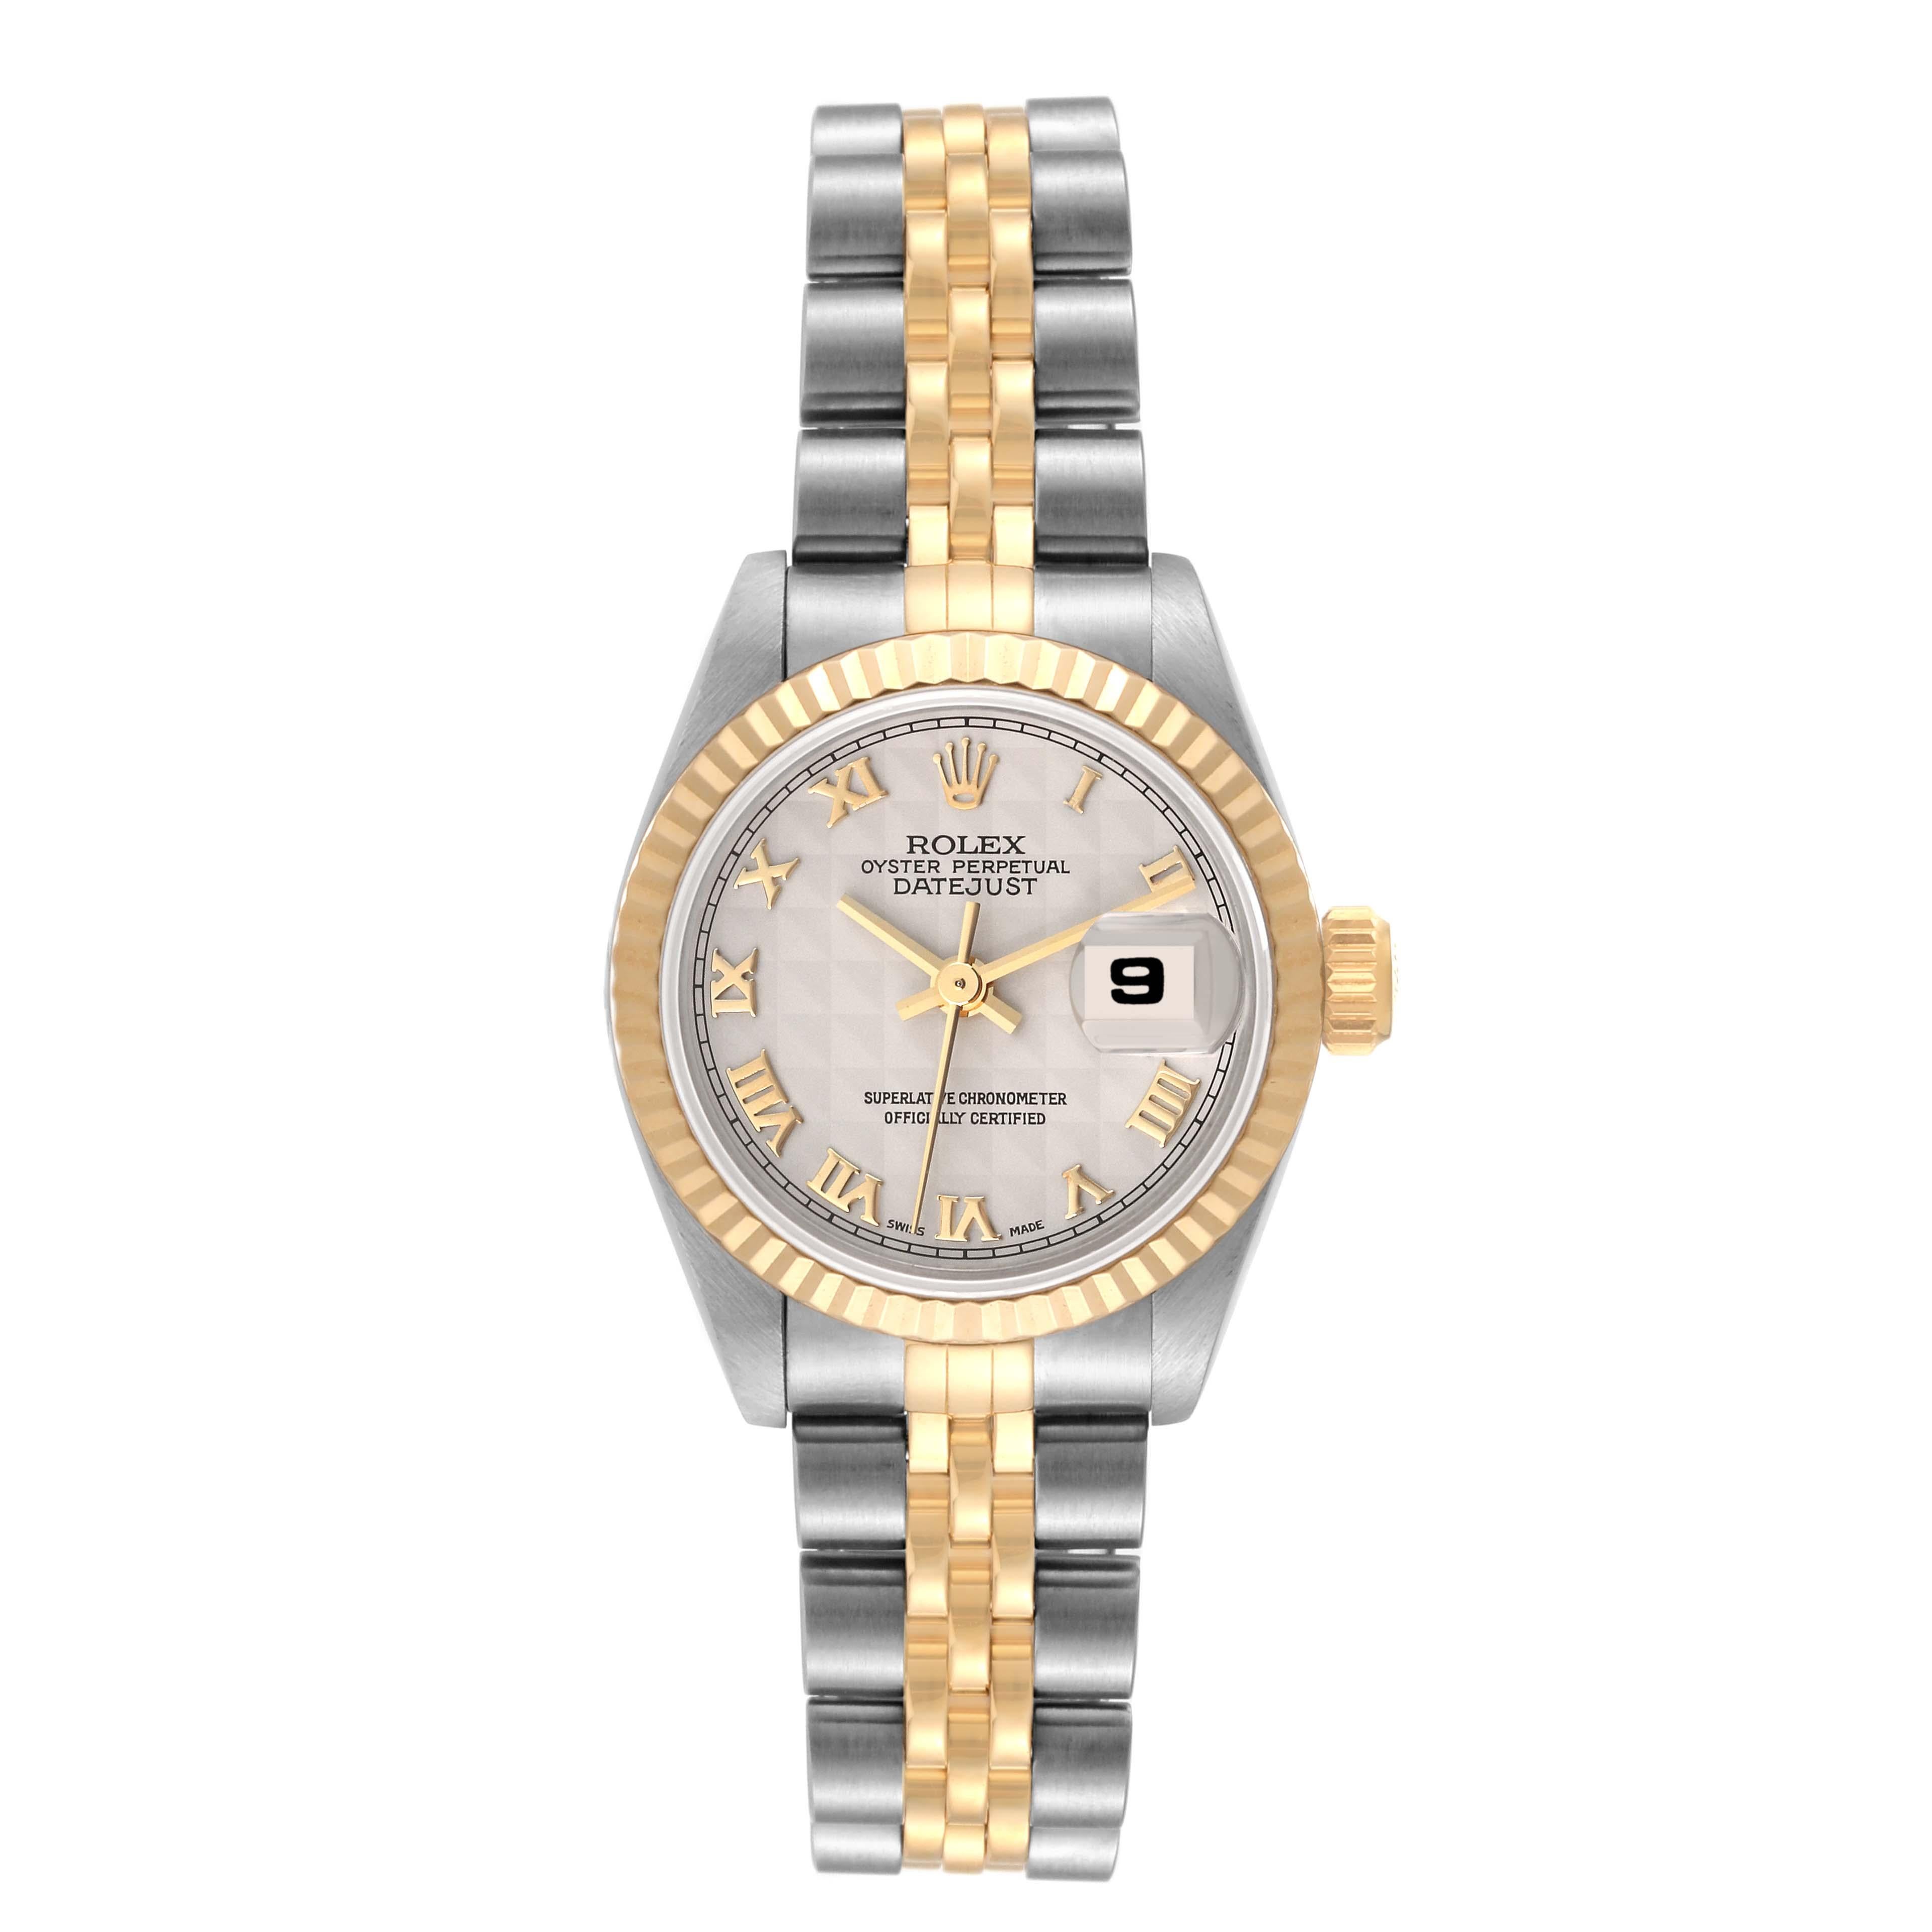 Rolex Datejust Steel Yellow Gold Ivory Pyramid Dial Ladies Watch 69173. Officially certified chronometer automatic self-winding movement. Stainless steel oyster case 26 mm in diameter. Rolex logo on the crown. 18k yellow gold fluted bezel. Scratch